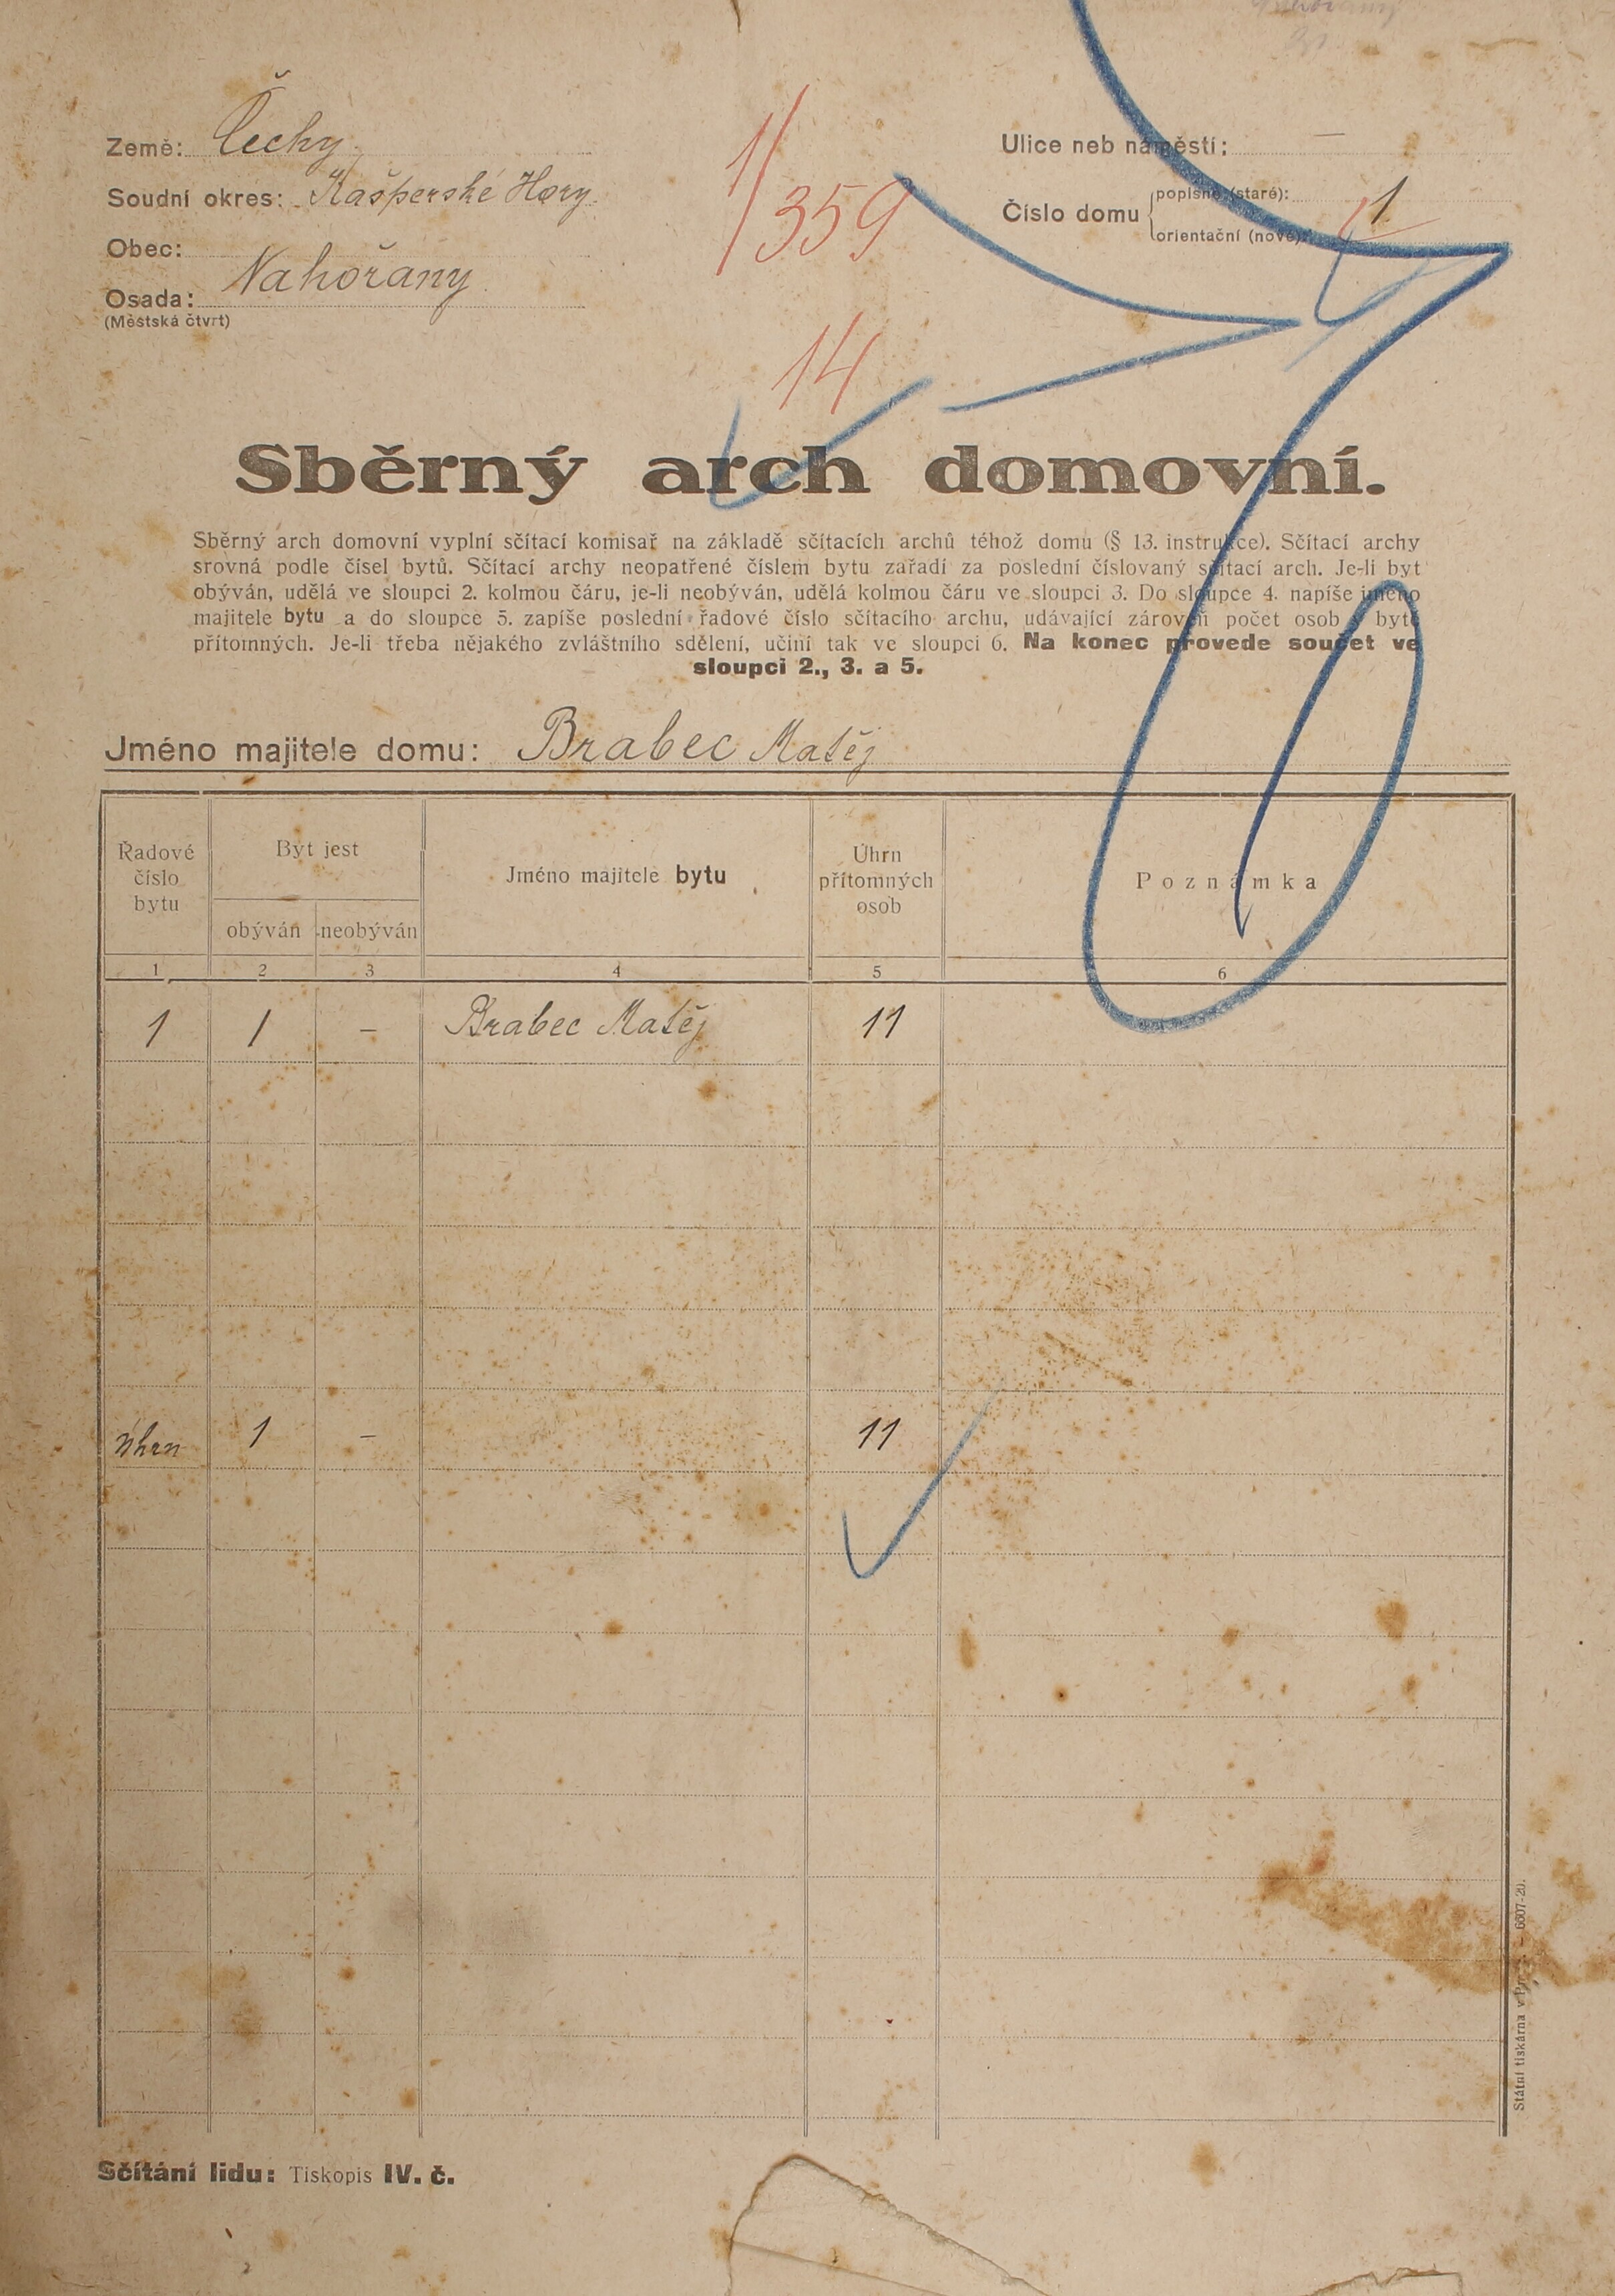 1. soap-kt_01159_census-1921-nahoranky-cp001_0010